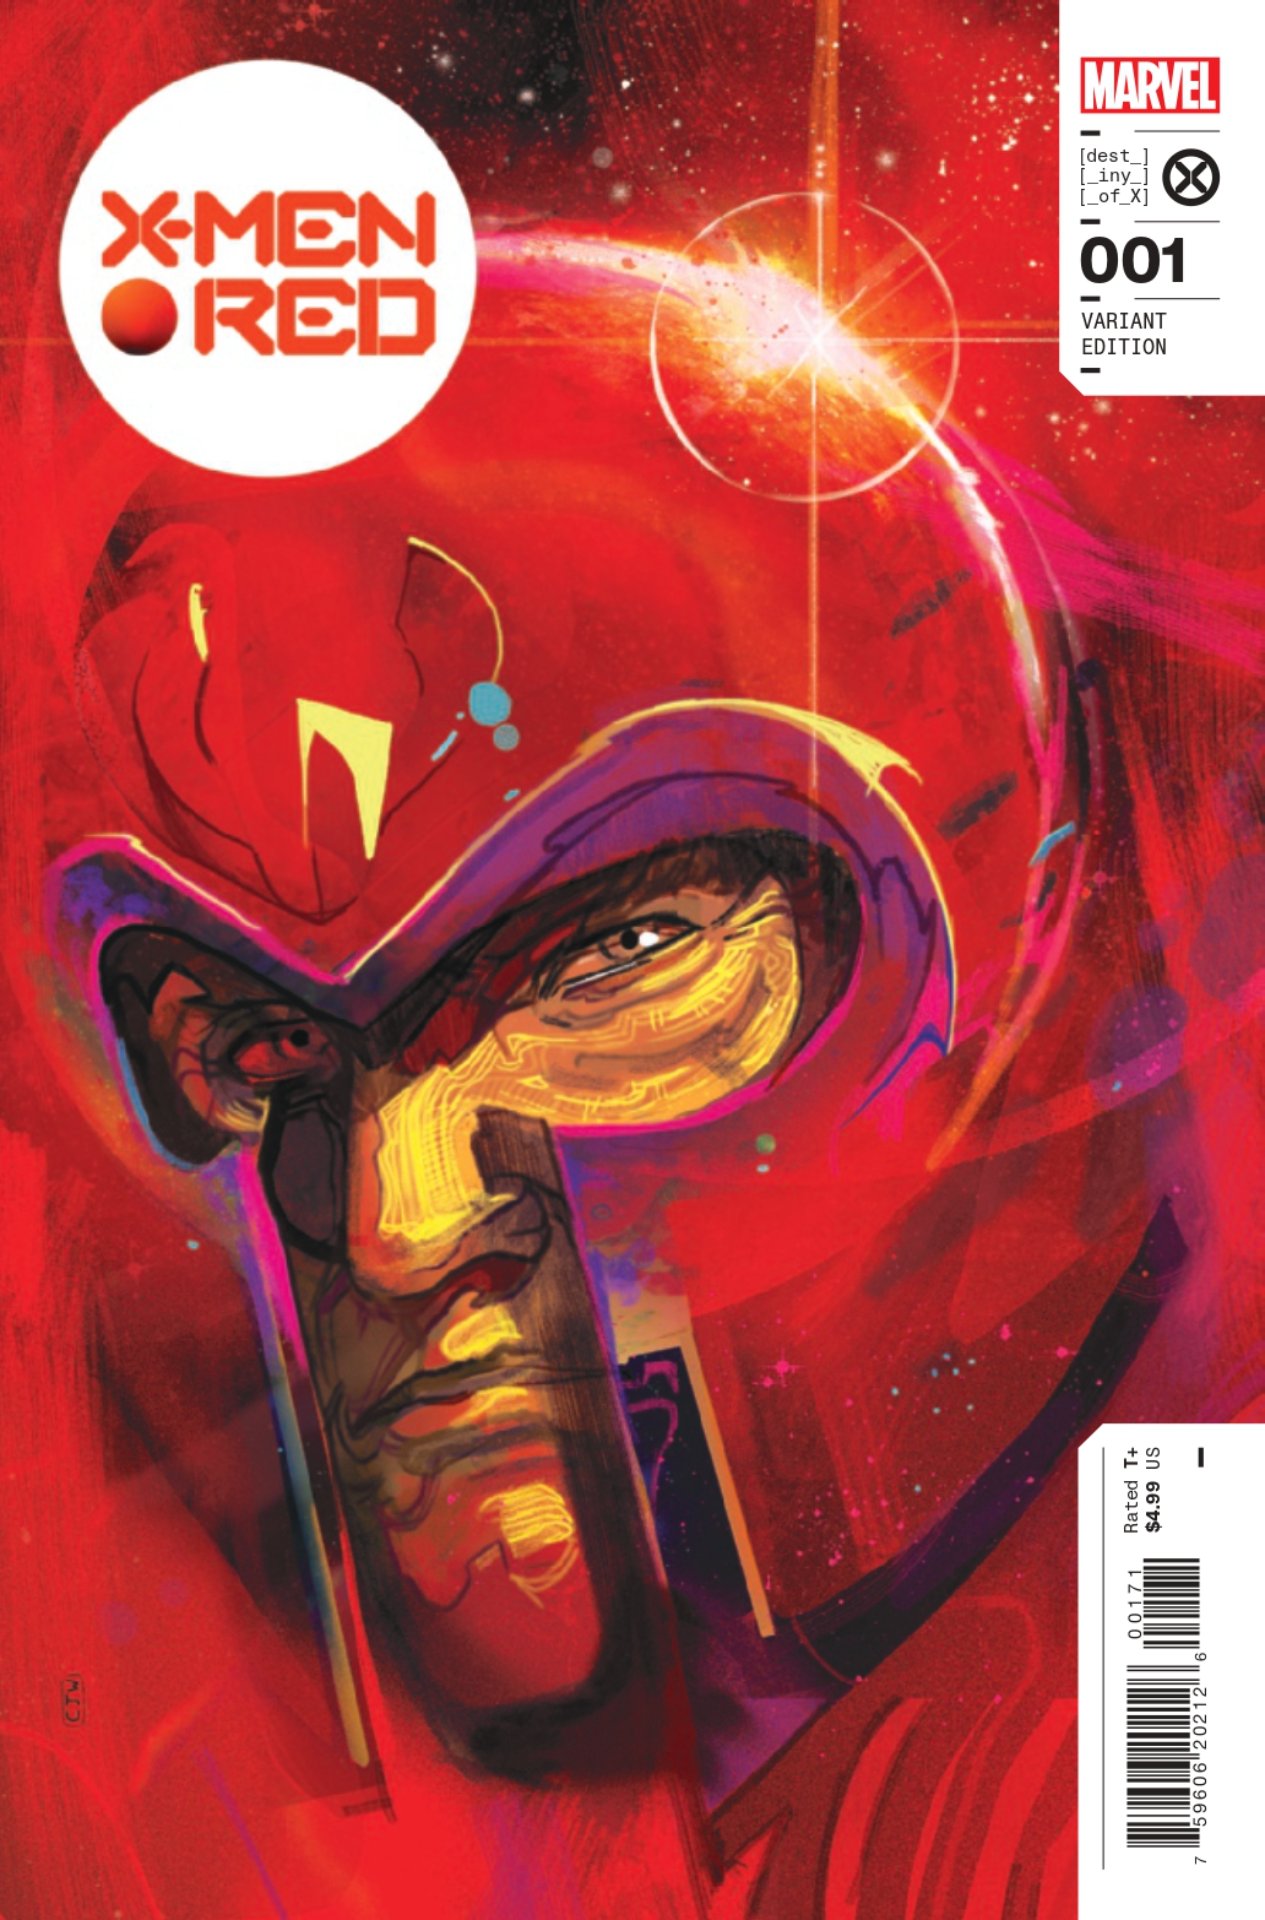 X-Men Red #1 variant covers